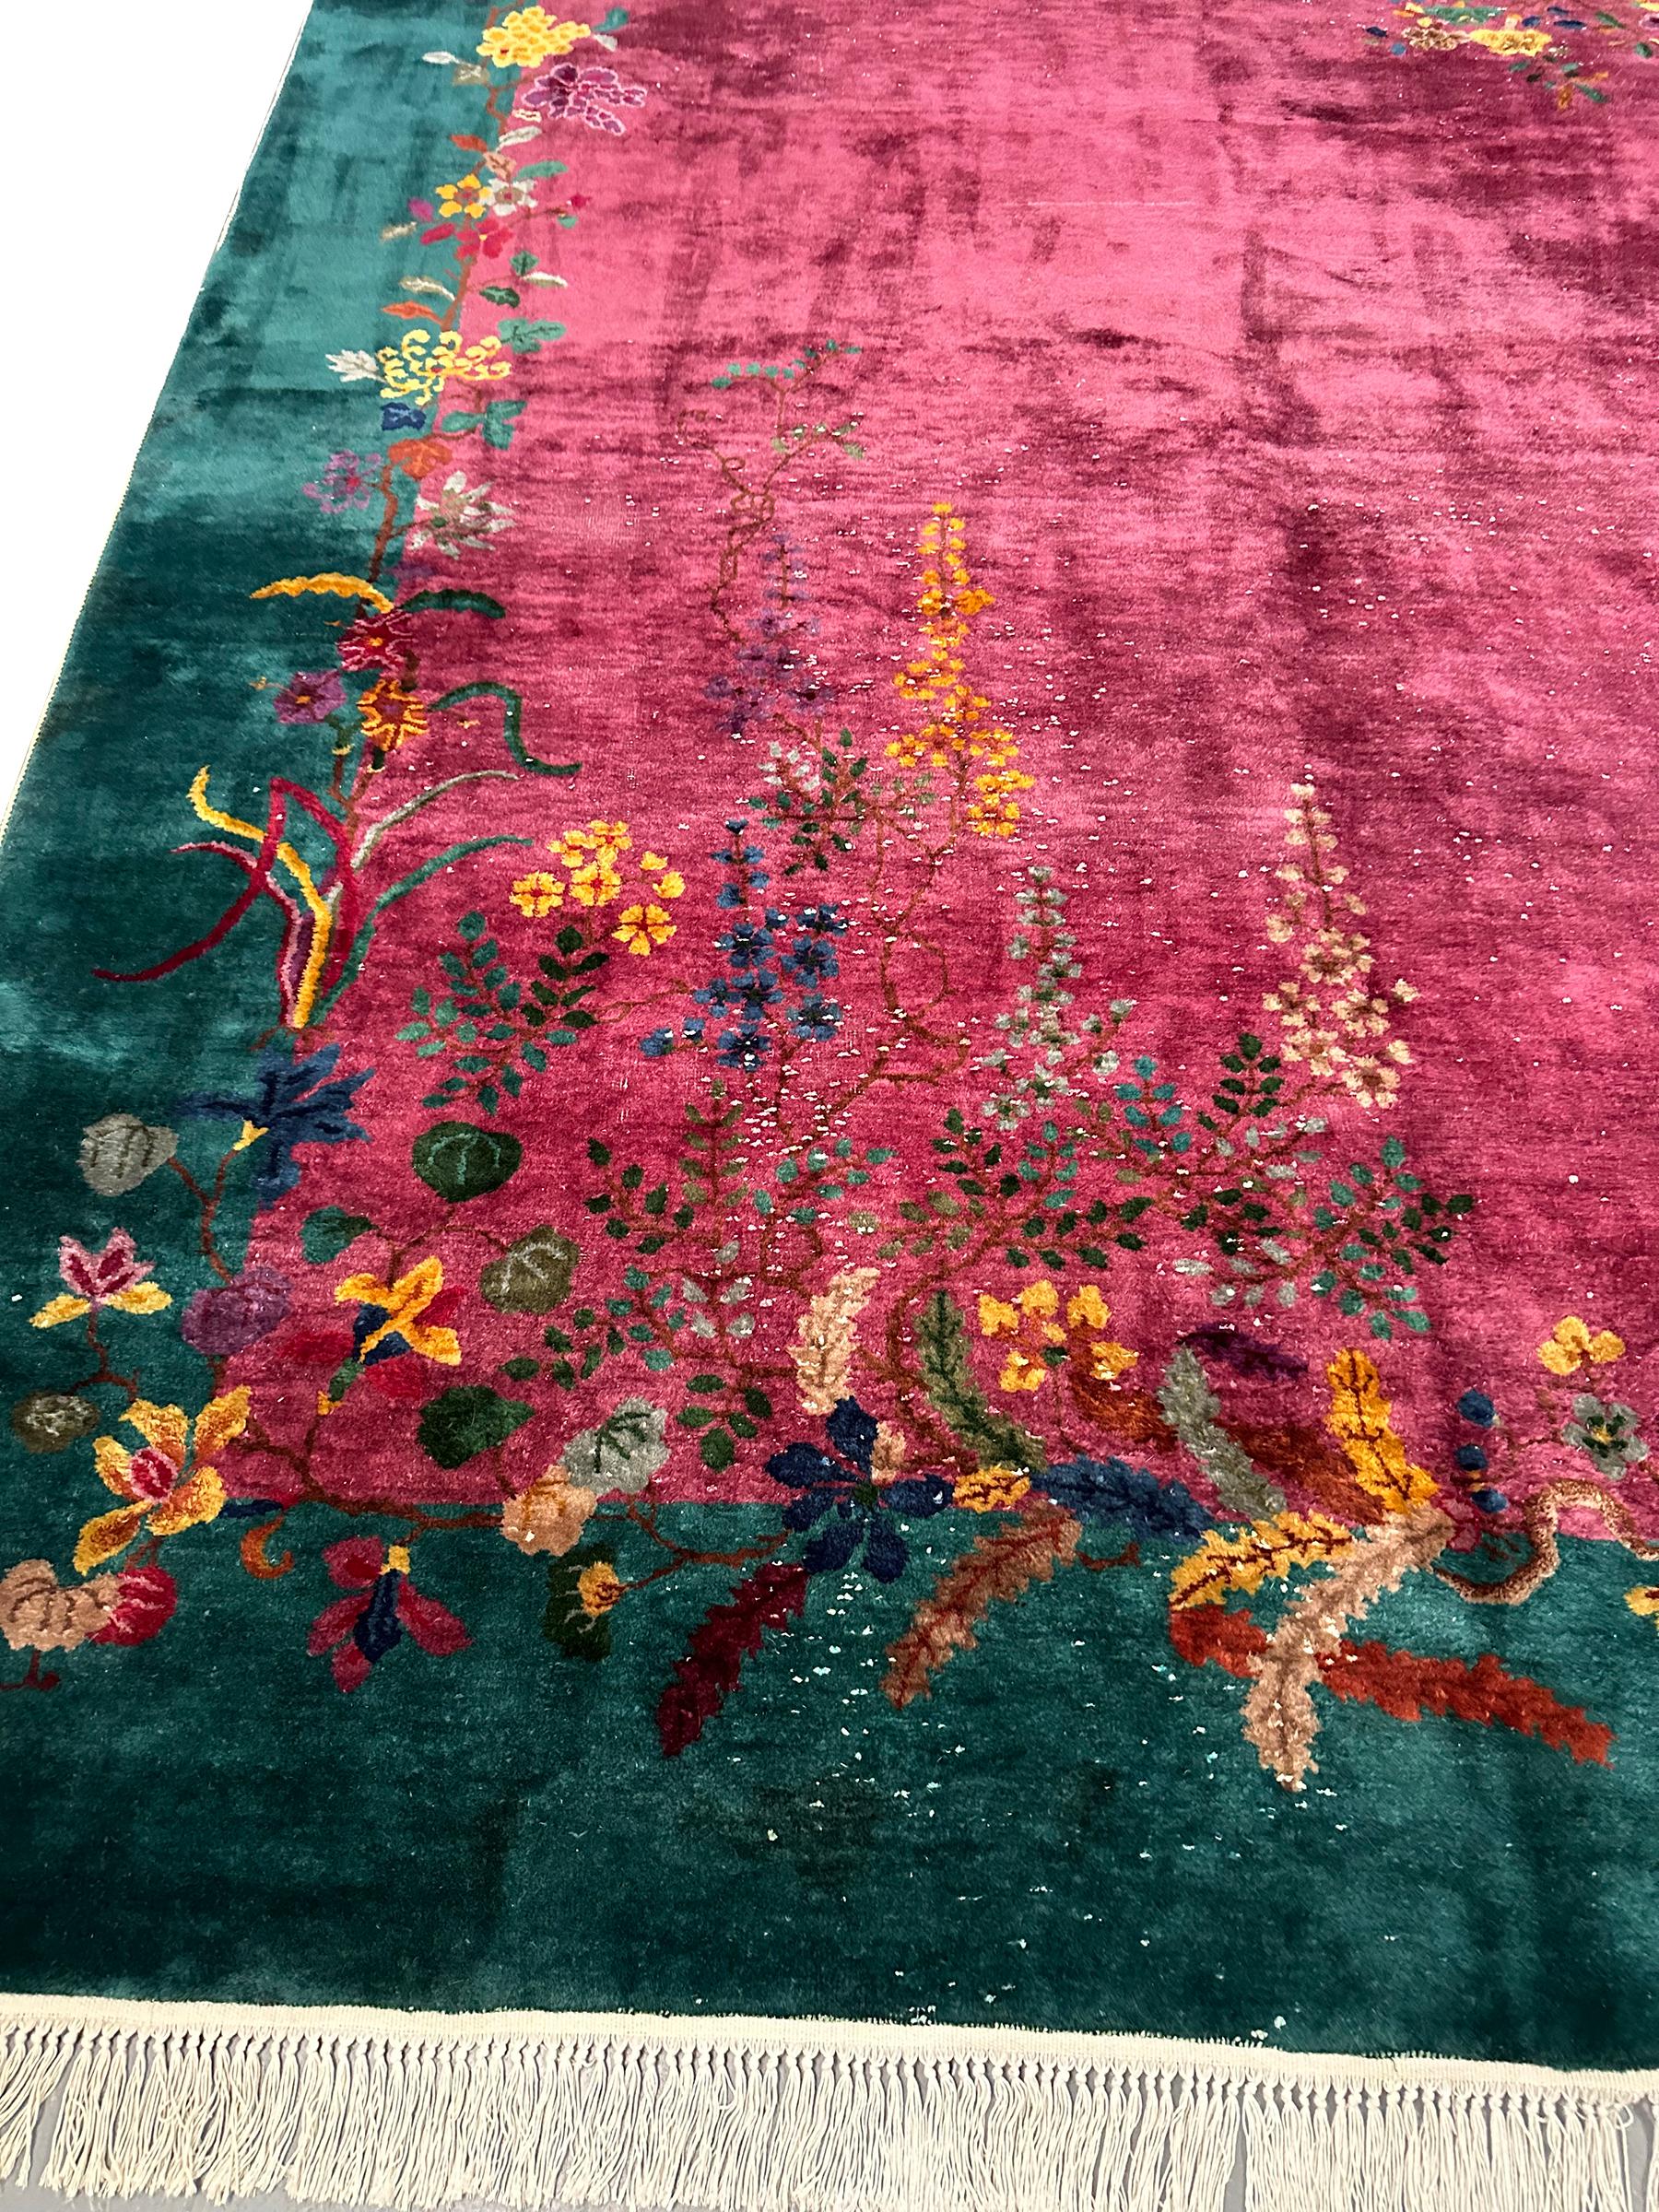 Early 20th Century Antique Art Deco Rug Antique Chinese Walter Nichols Rug 1920 9x12 275cm x 361cm  For Sale